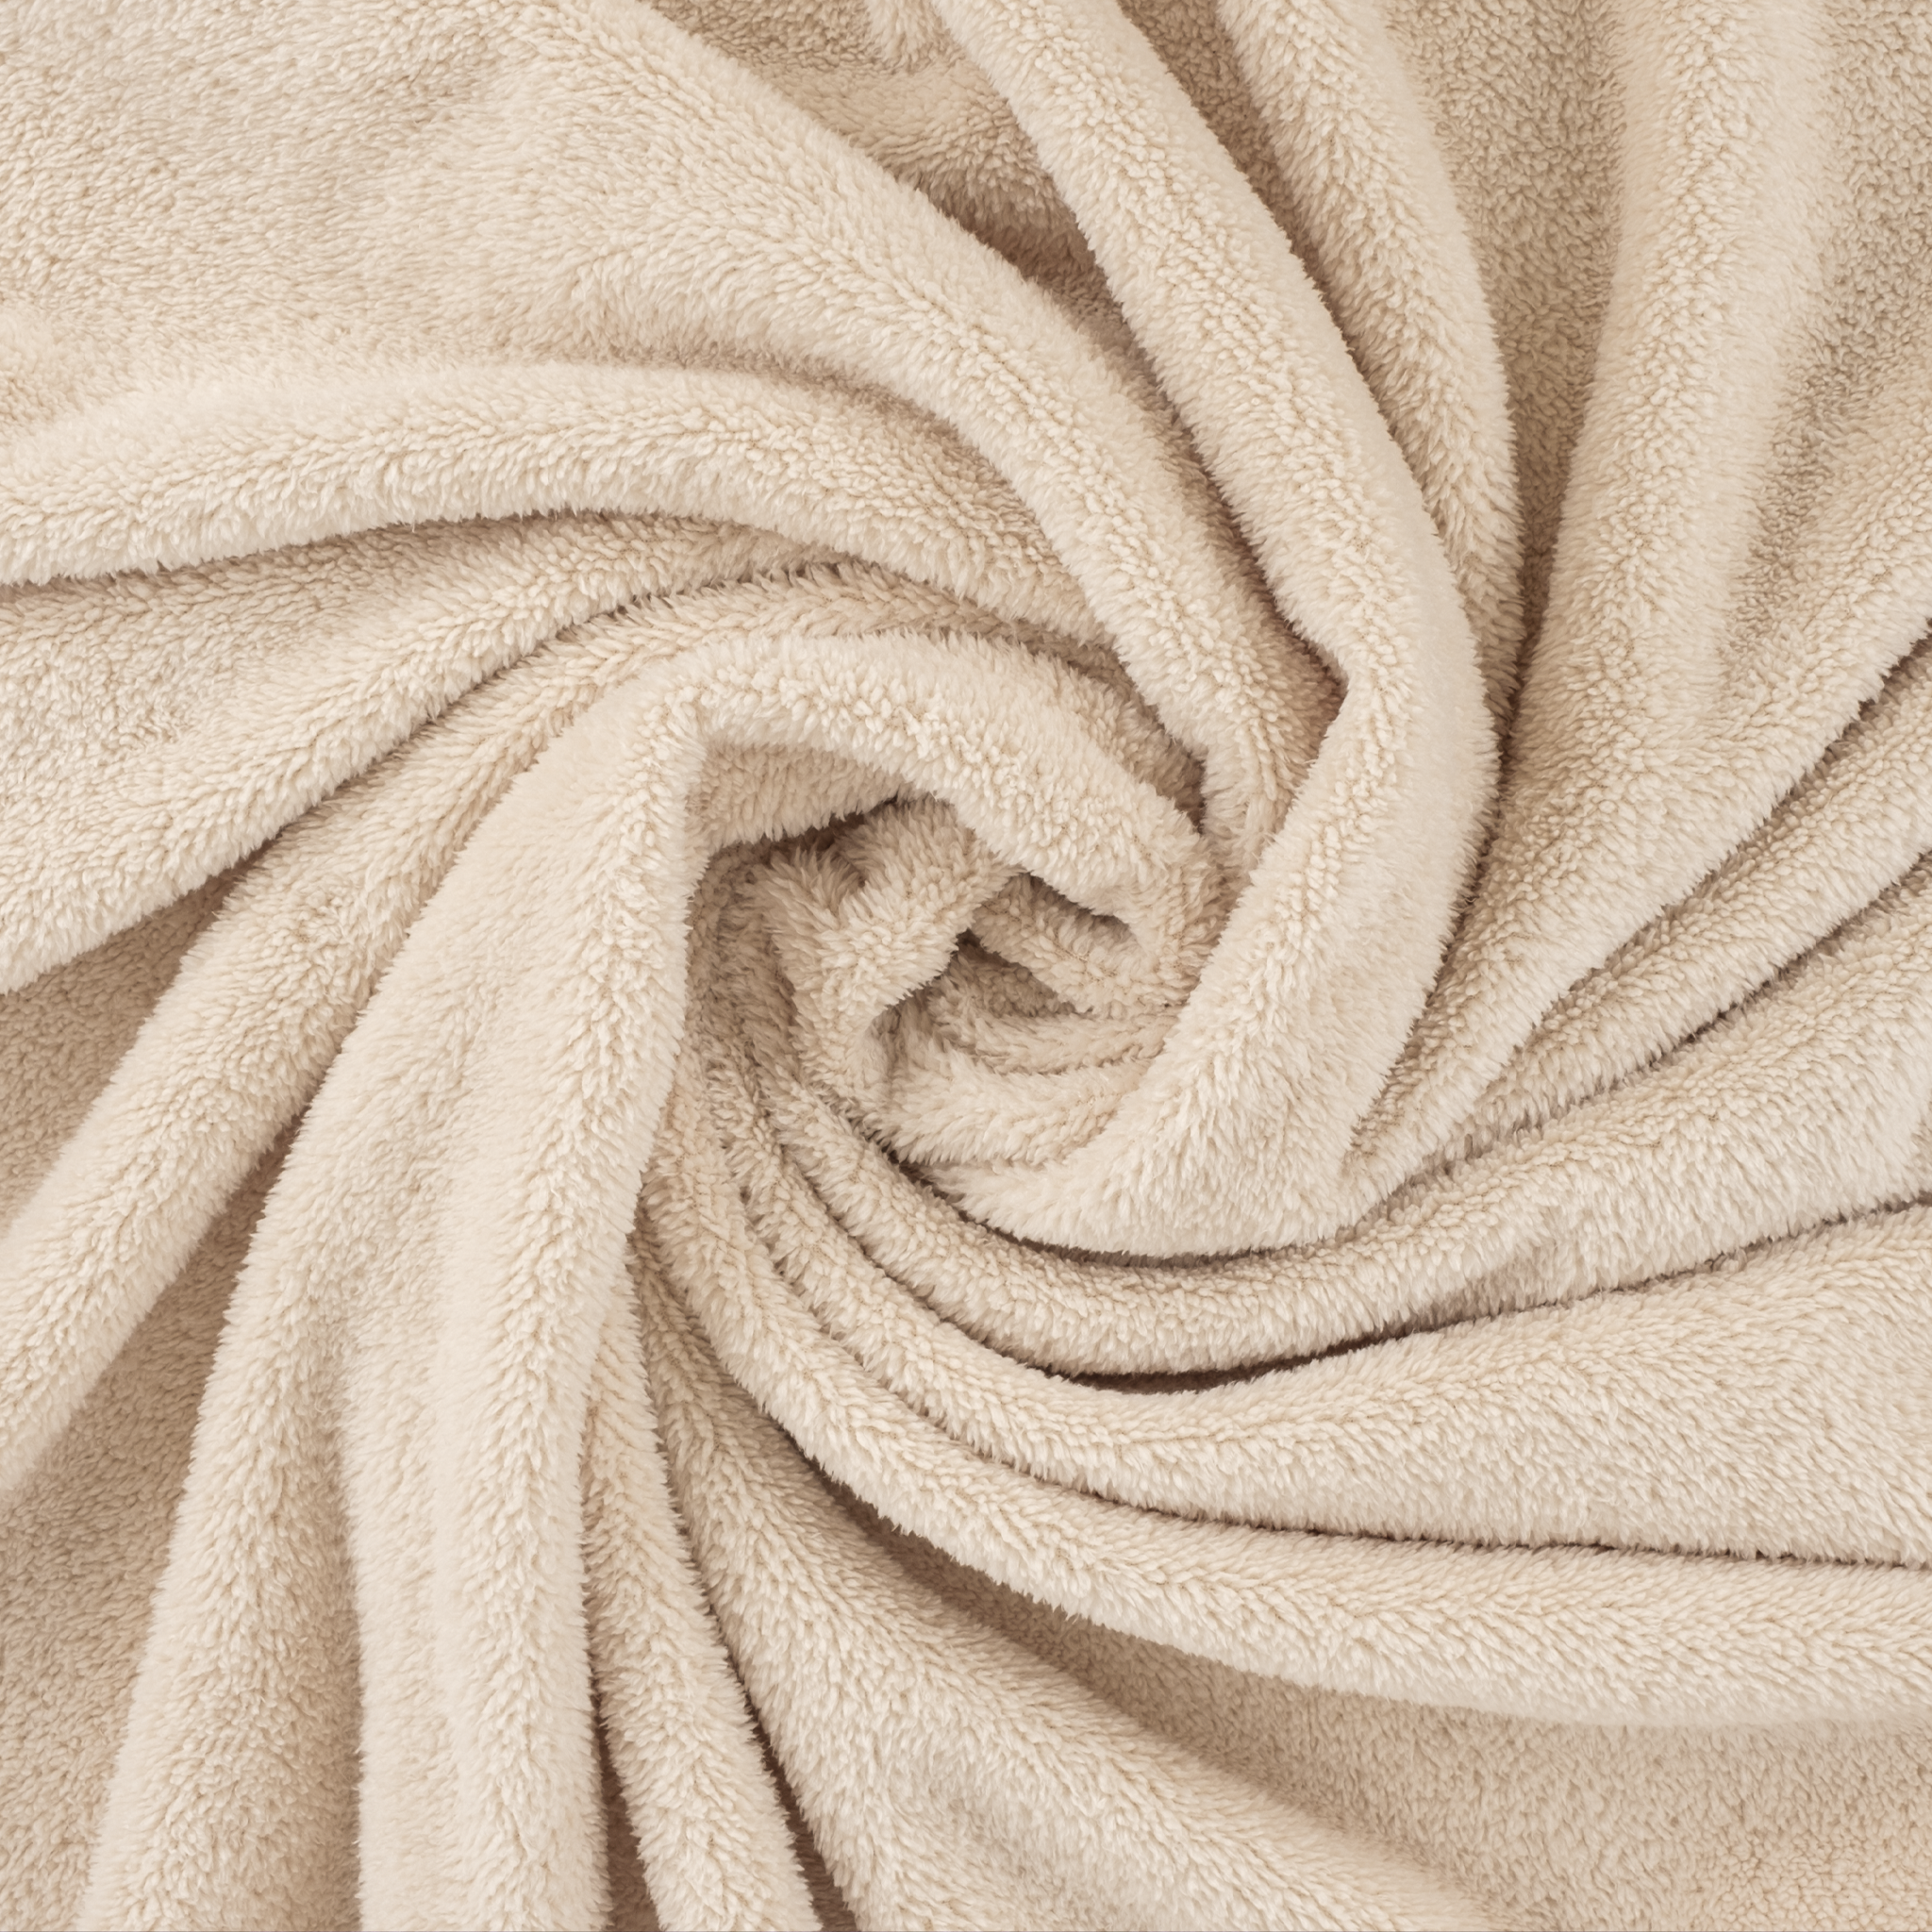 American Soft Linen - Bedding Fleece Blanket - Queen Size 85x90 inches - Sand-Taupe - 5